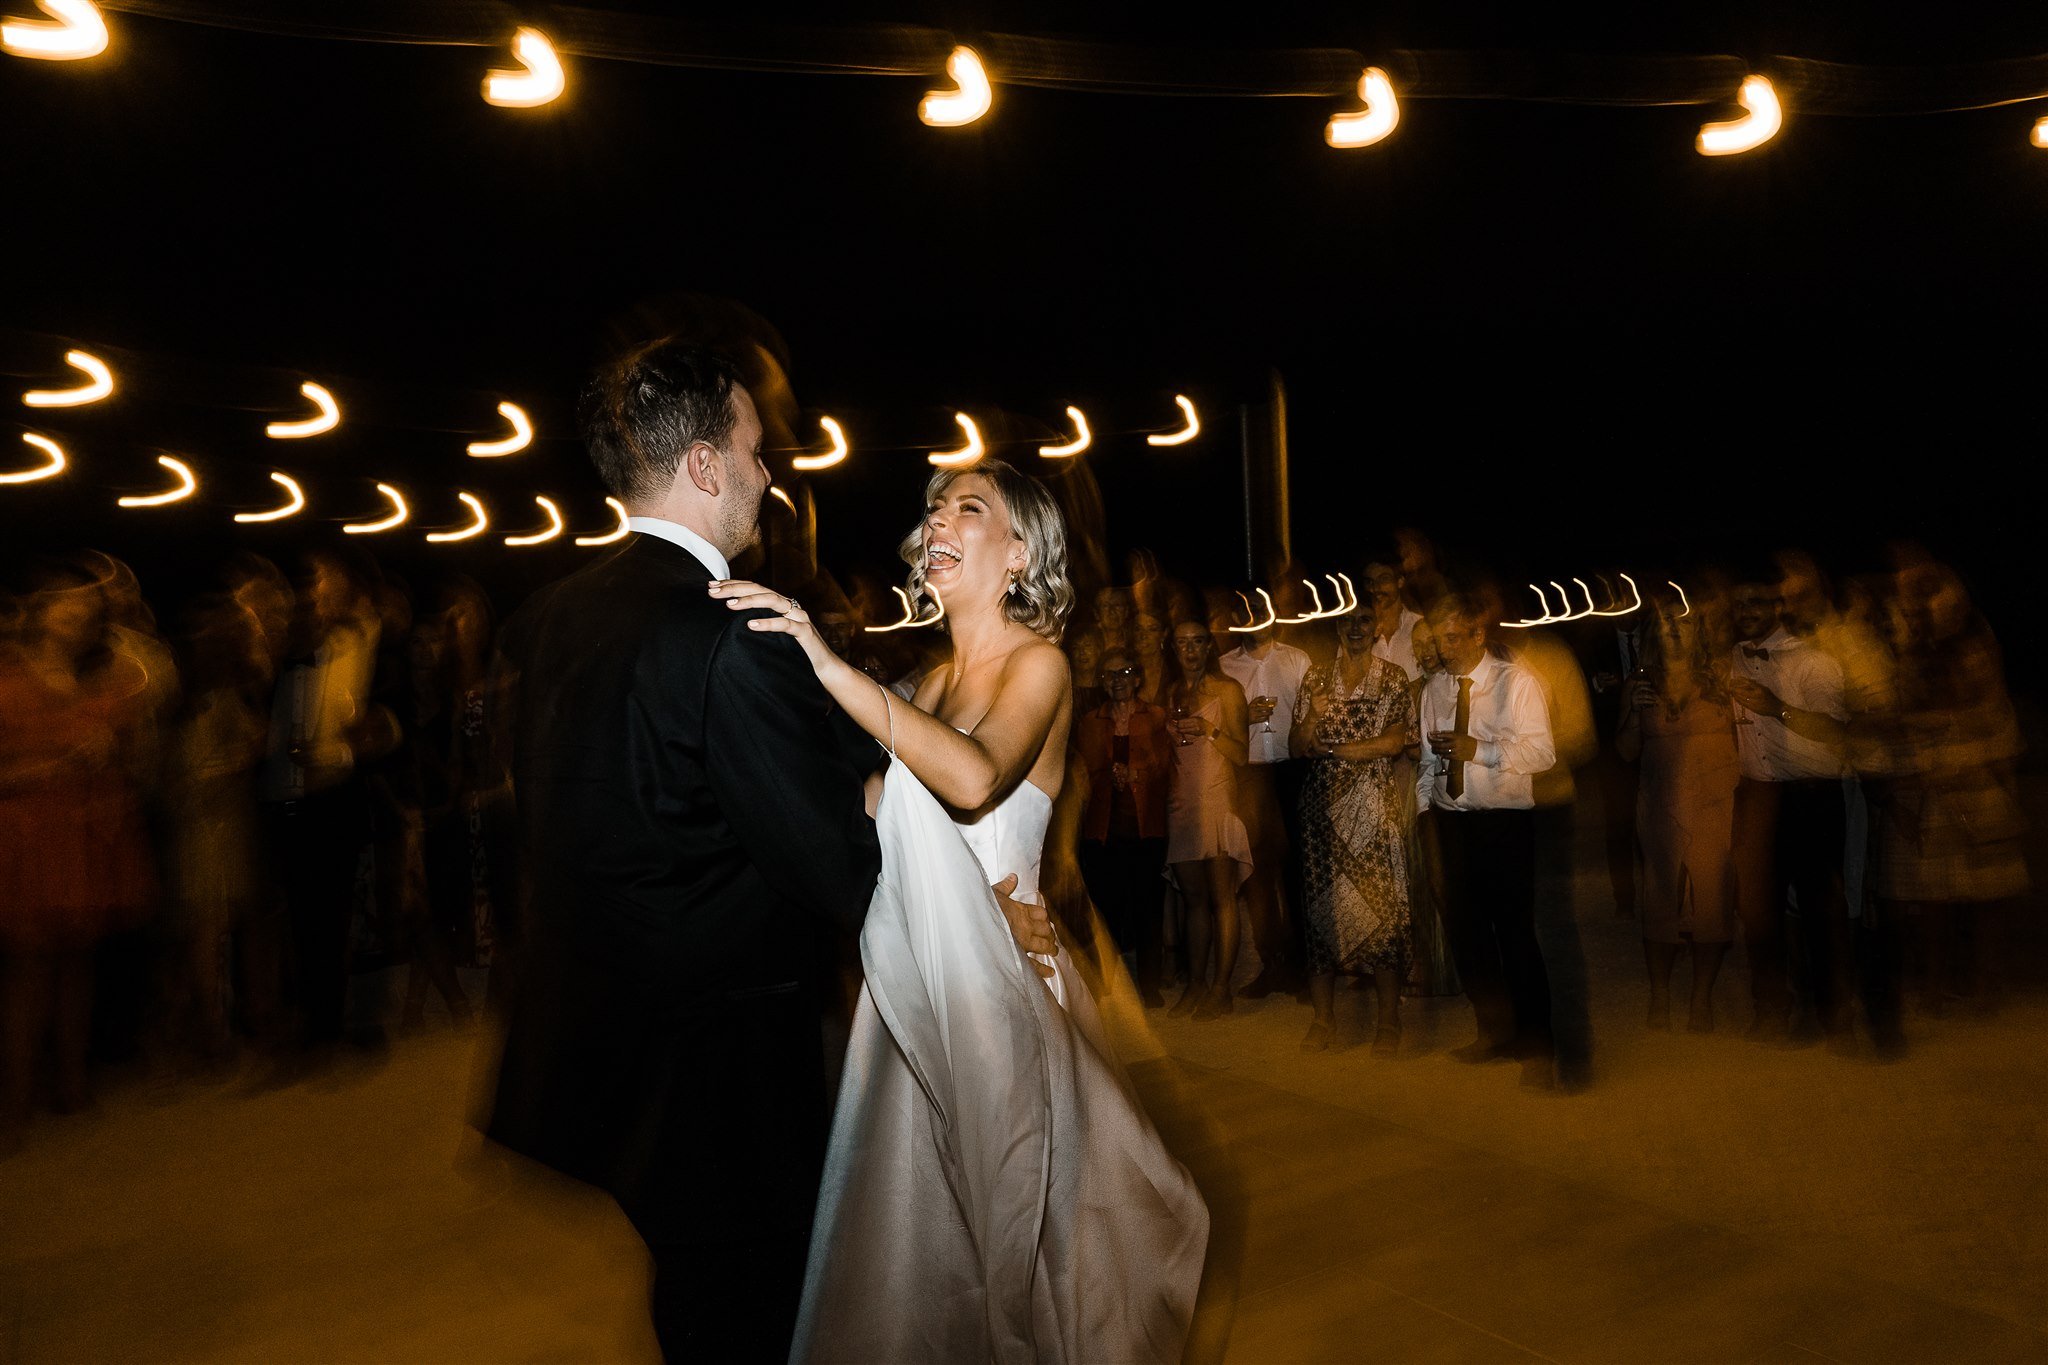  the couple’s first dance in their wedding reception at Assembly Yard in Fermantle Australia 